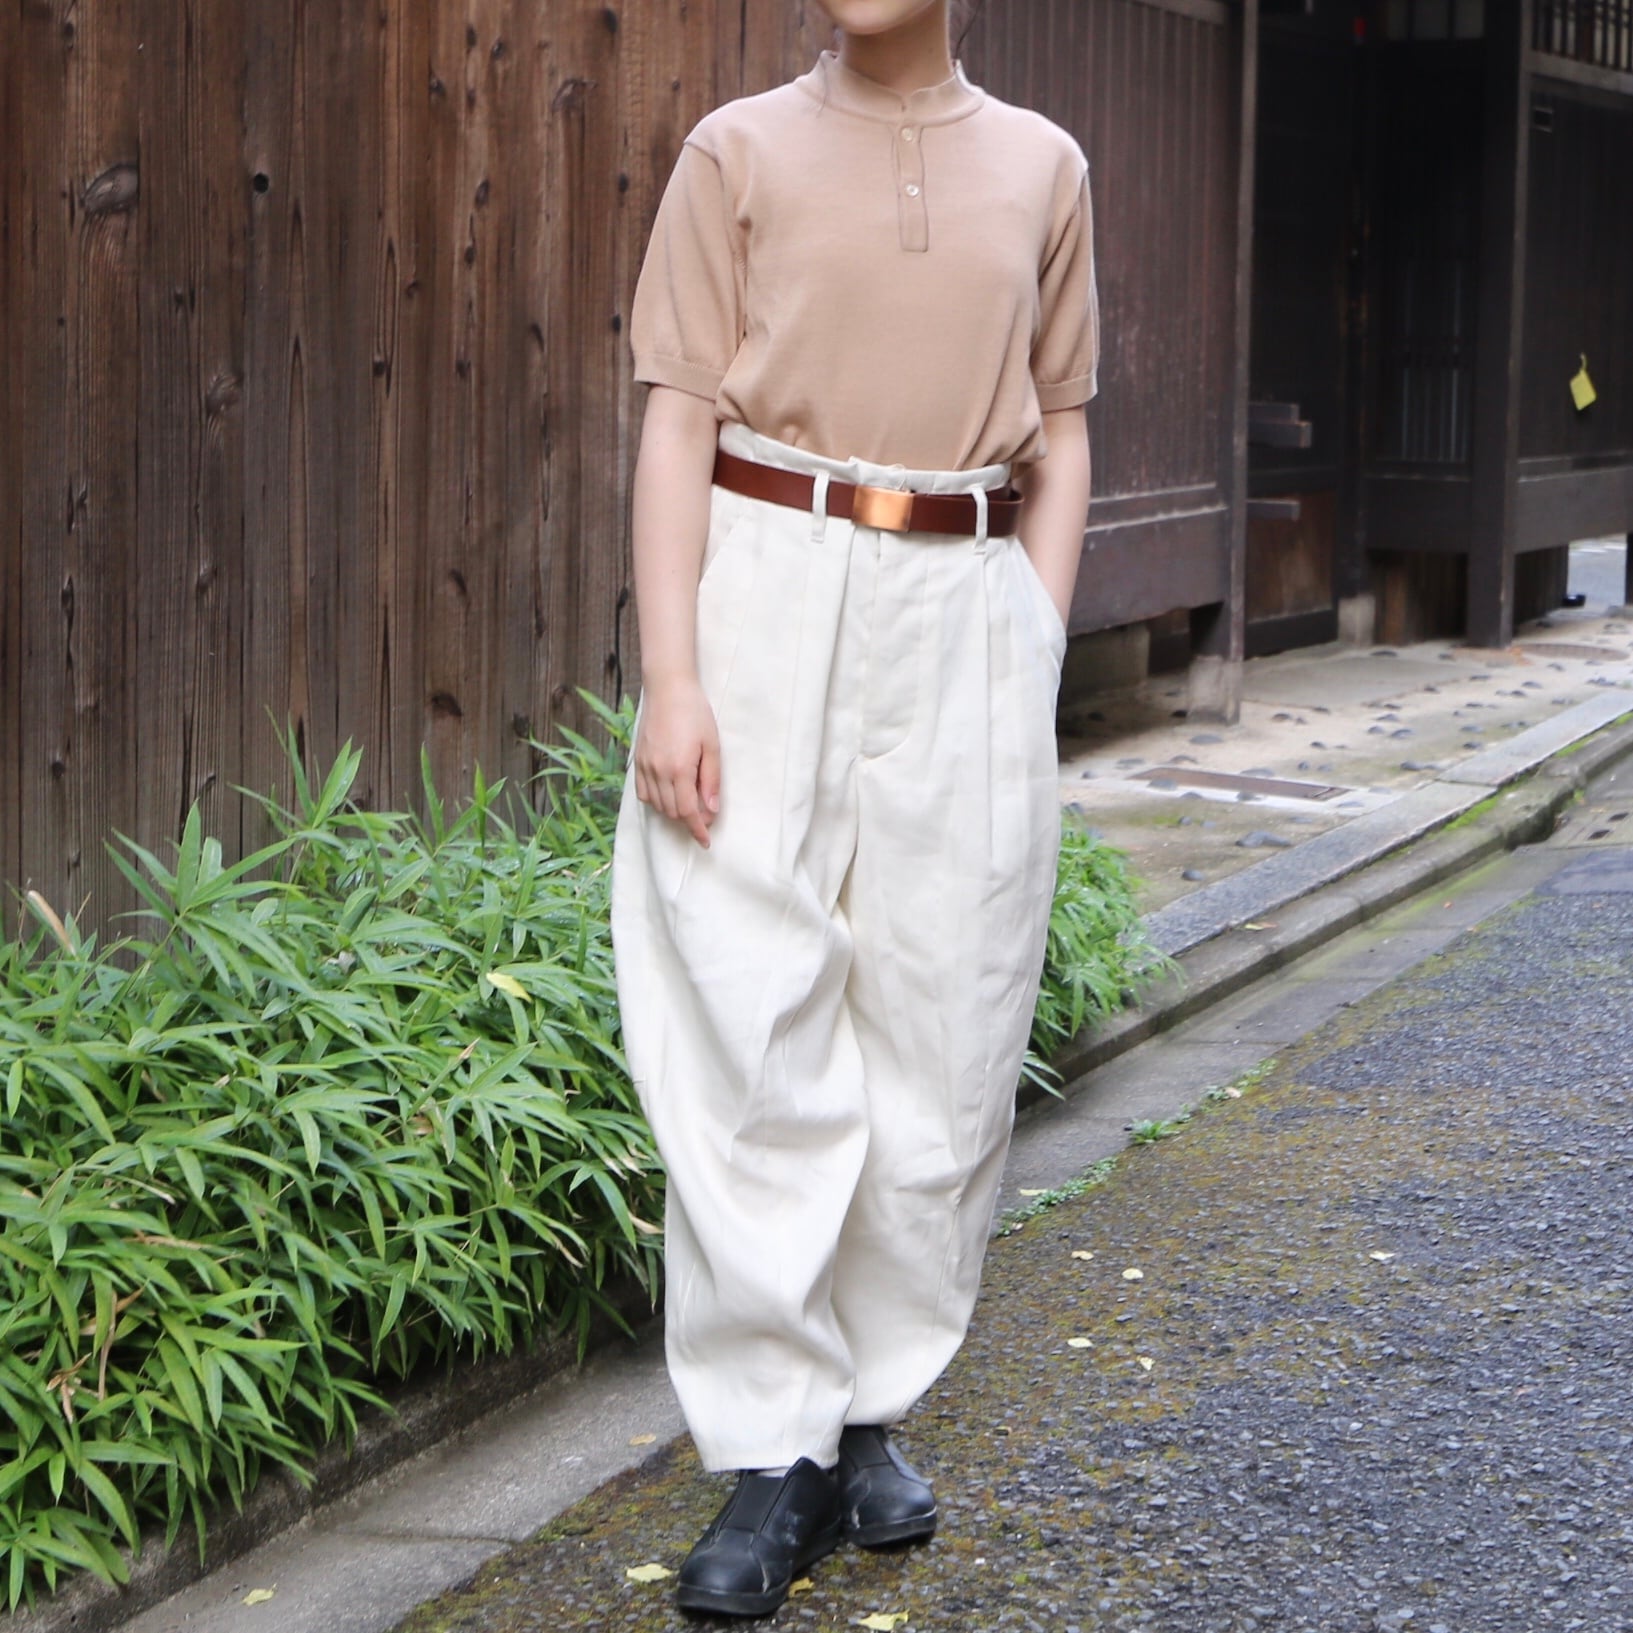 ASEEDONCLOUD アシードンクラウド　Sakurashi Trousers Offwhite #211502 | Routes*Roots  powered by BASE